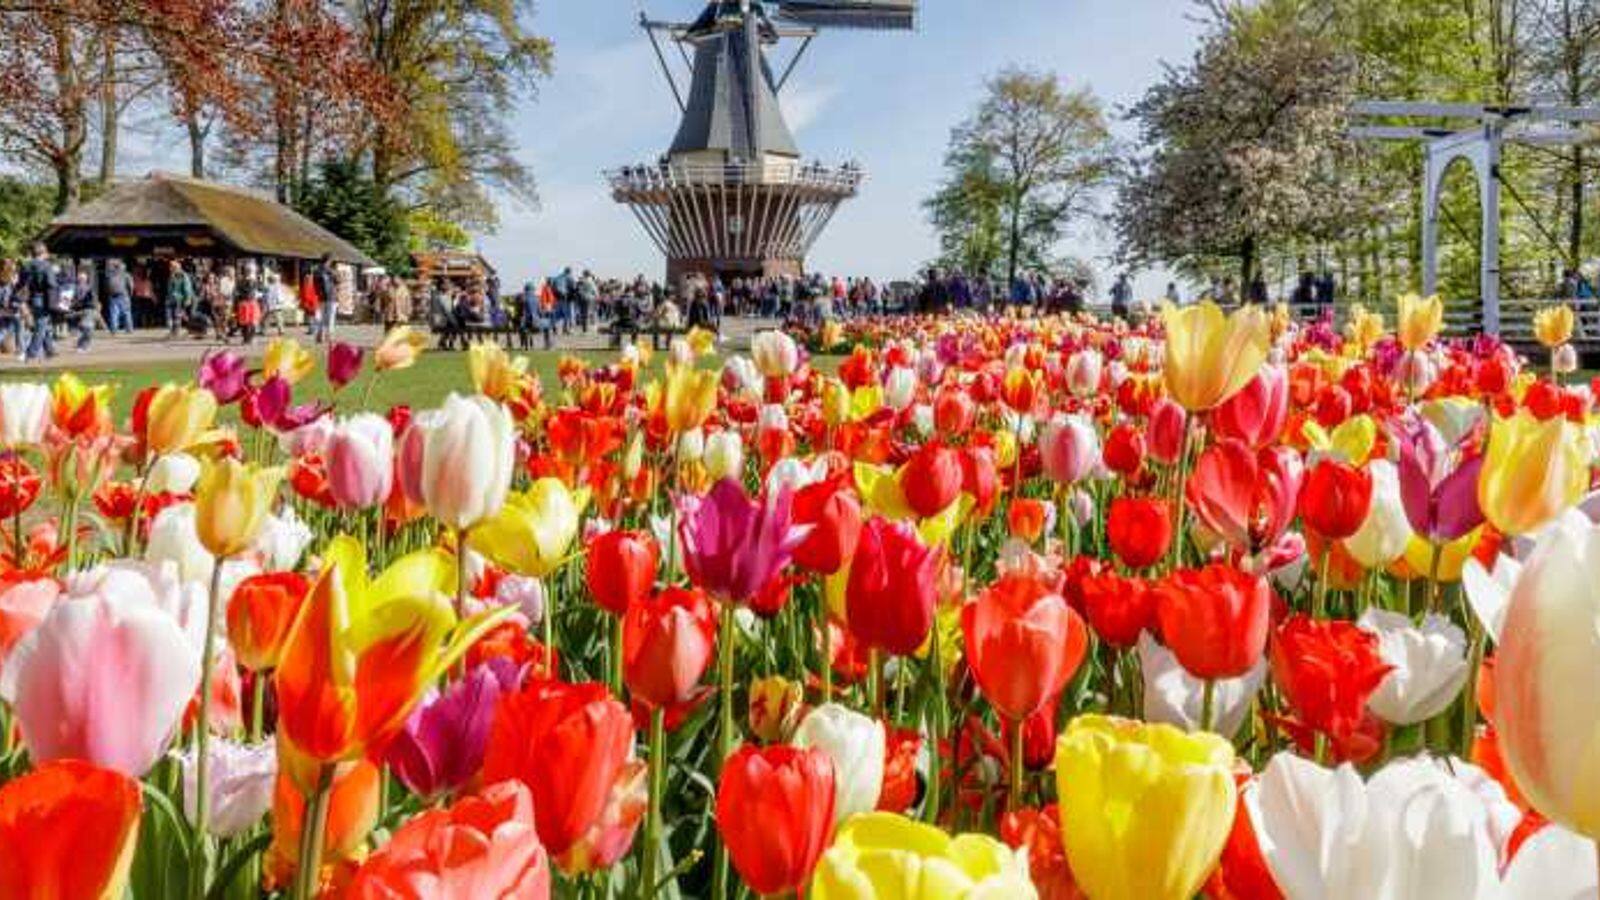 Amsterdam's springtime tulip spectacle is an attraction you can't miss